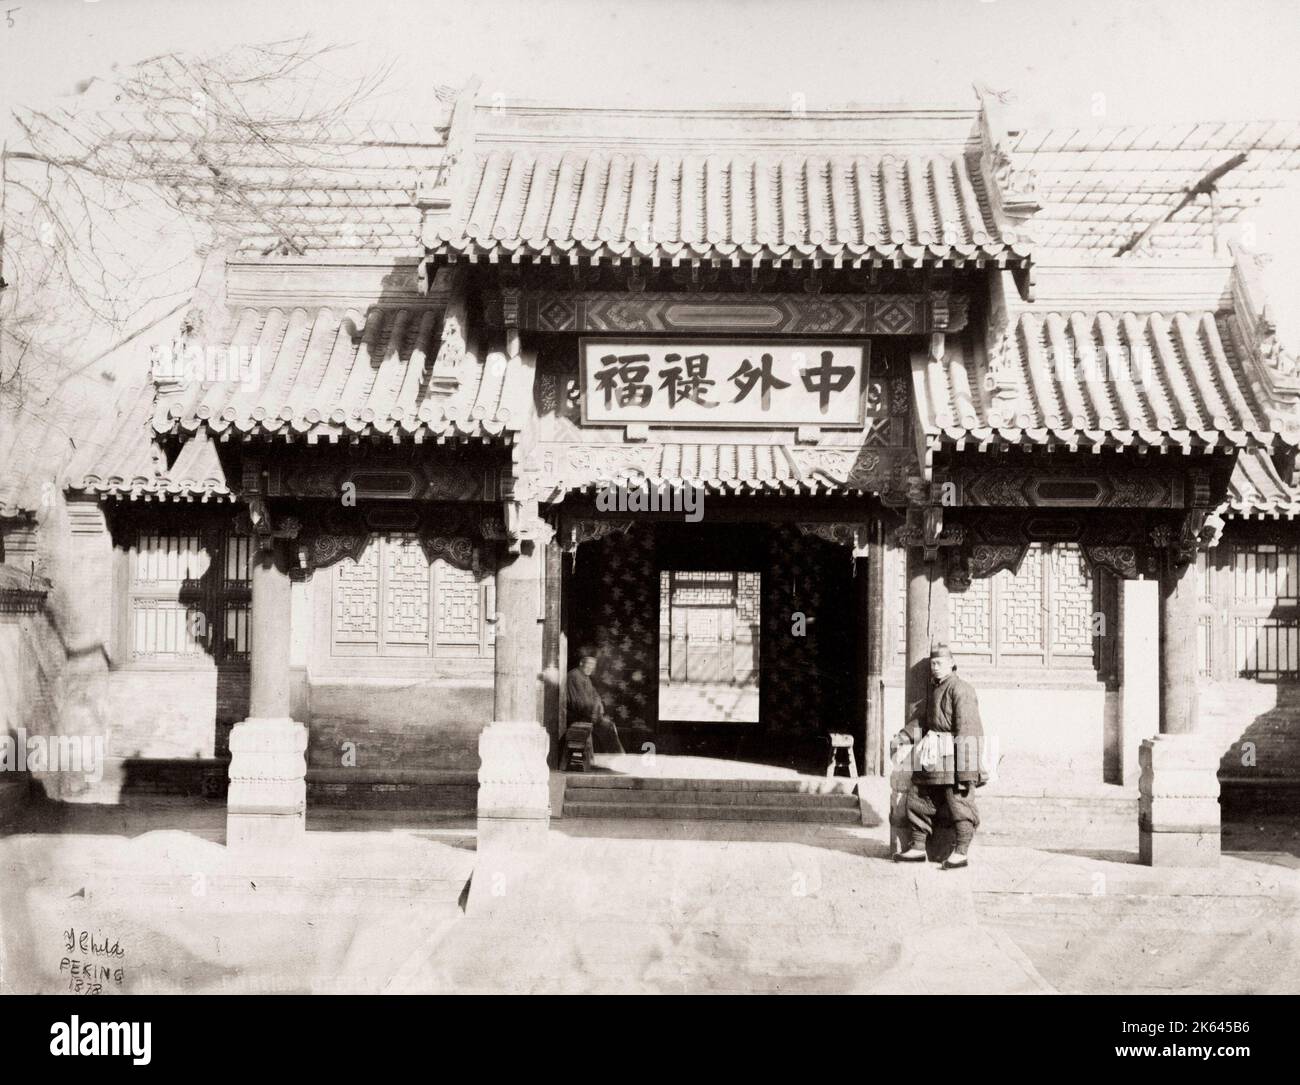 19th century vintage photograph: Tsung Li Yamen or The Zongli Yamen, effectively the Foreign Office of the Chinese Imperial government, Peking, Bejing, China. Thomas Child photograph. Stock Photo